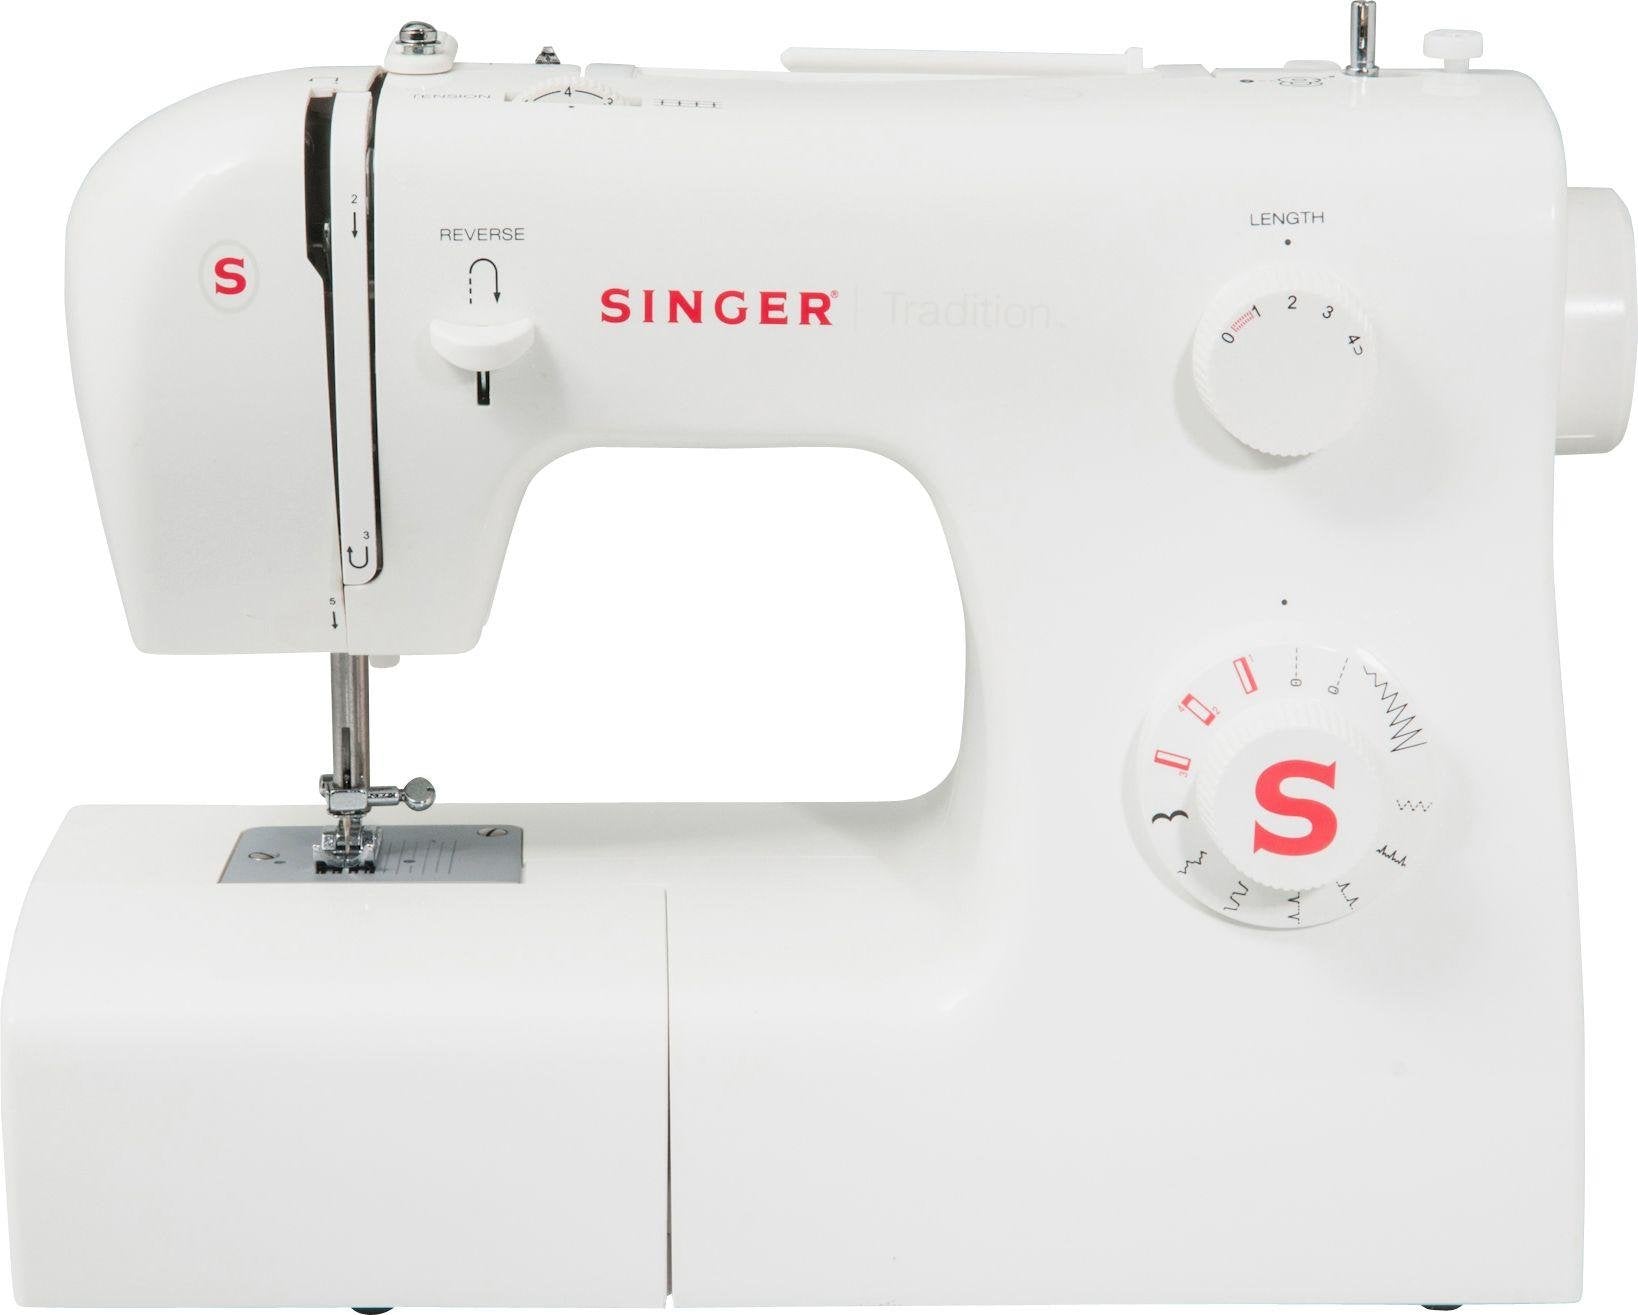 Singer Tradition 2250 Sewing Machine - Good as New